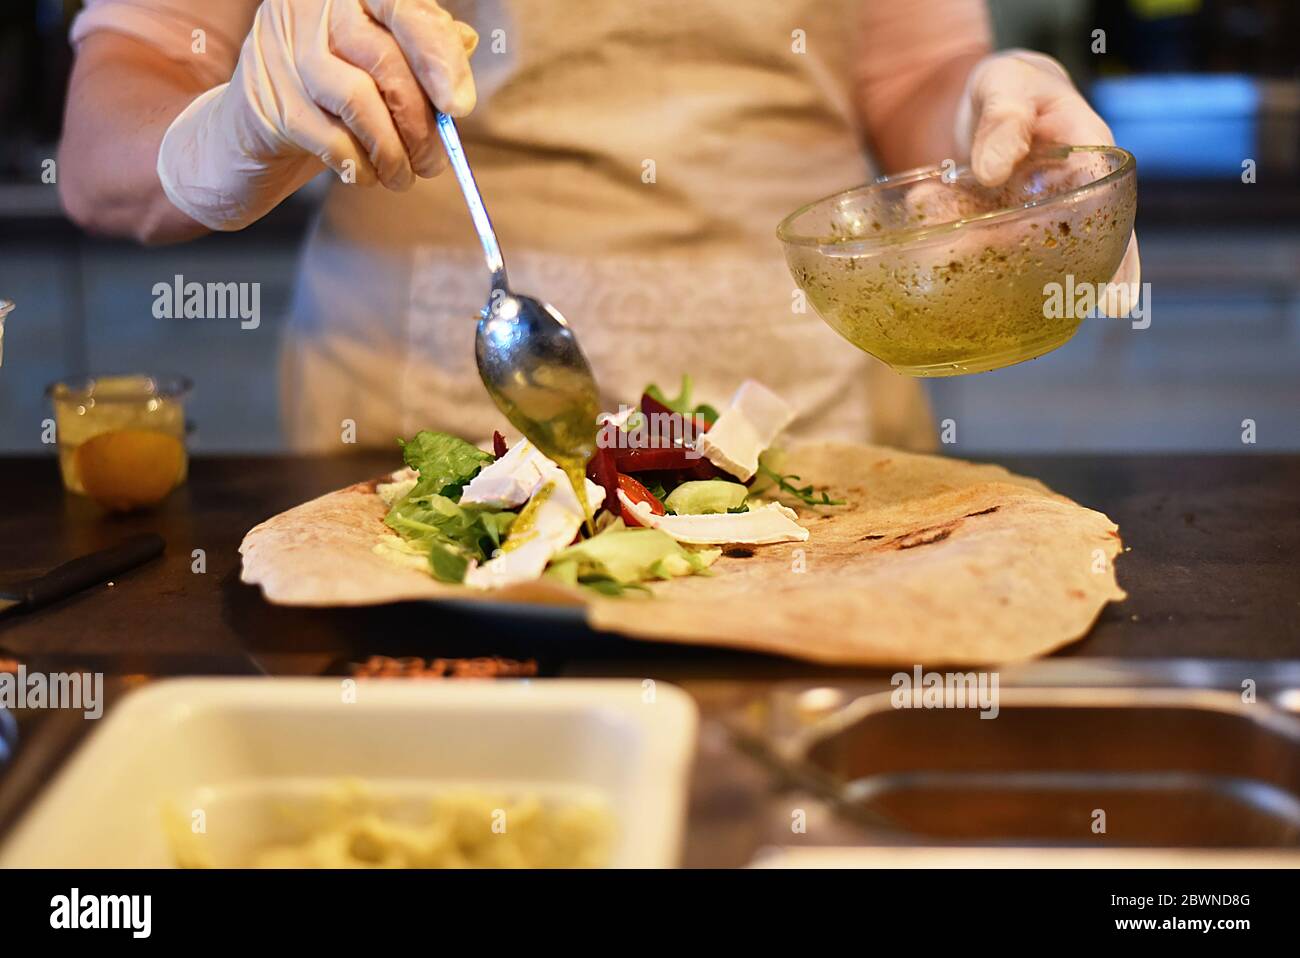 woman fills and rolls a vegetable wrap Stock Photo